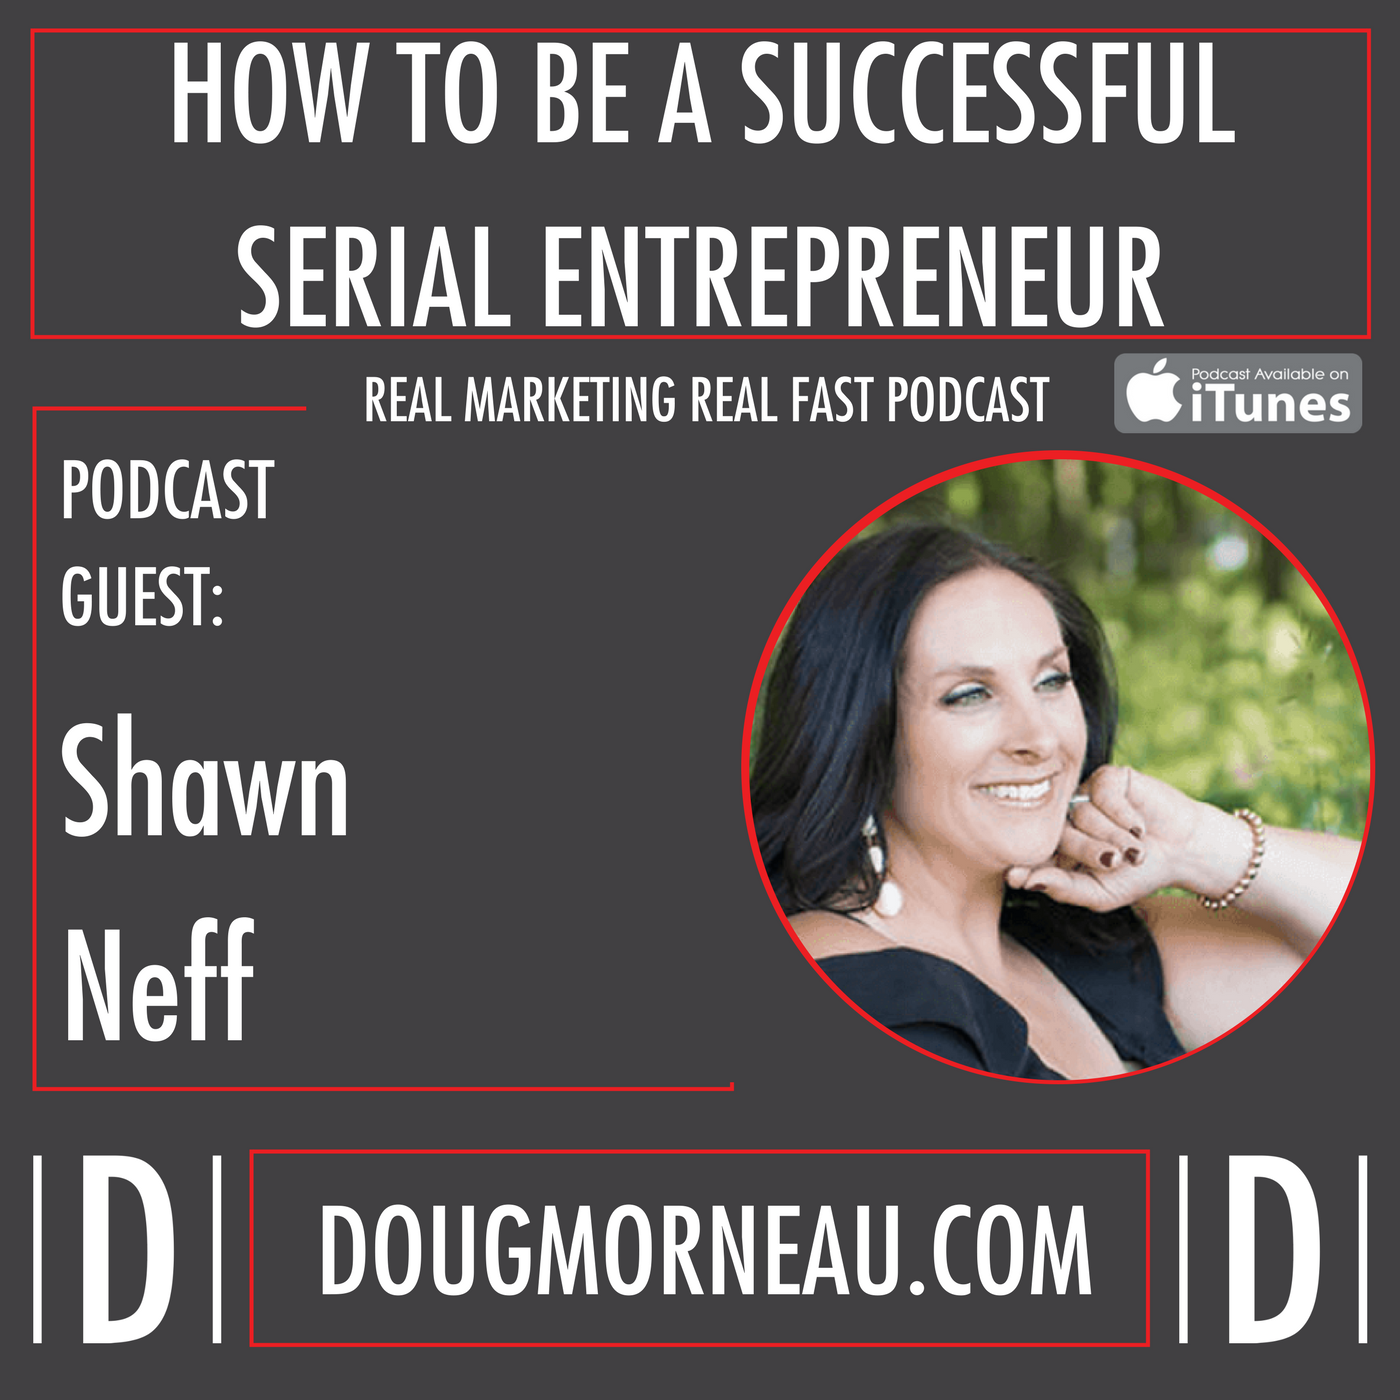 HOW TO BE A SUCCESSFUL SERIAL ENTREPRENEUR - SHAWN NEFF - DOUG MORNEAU - REAL MARKETING REAL FAST PODCAST